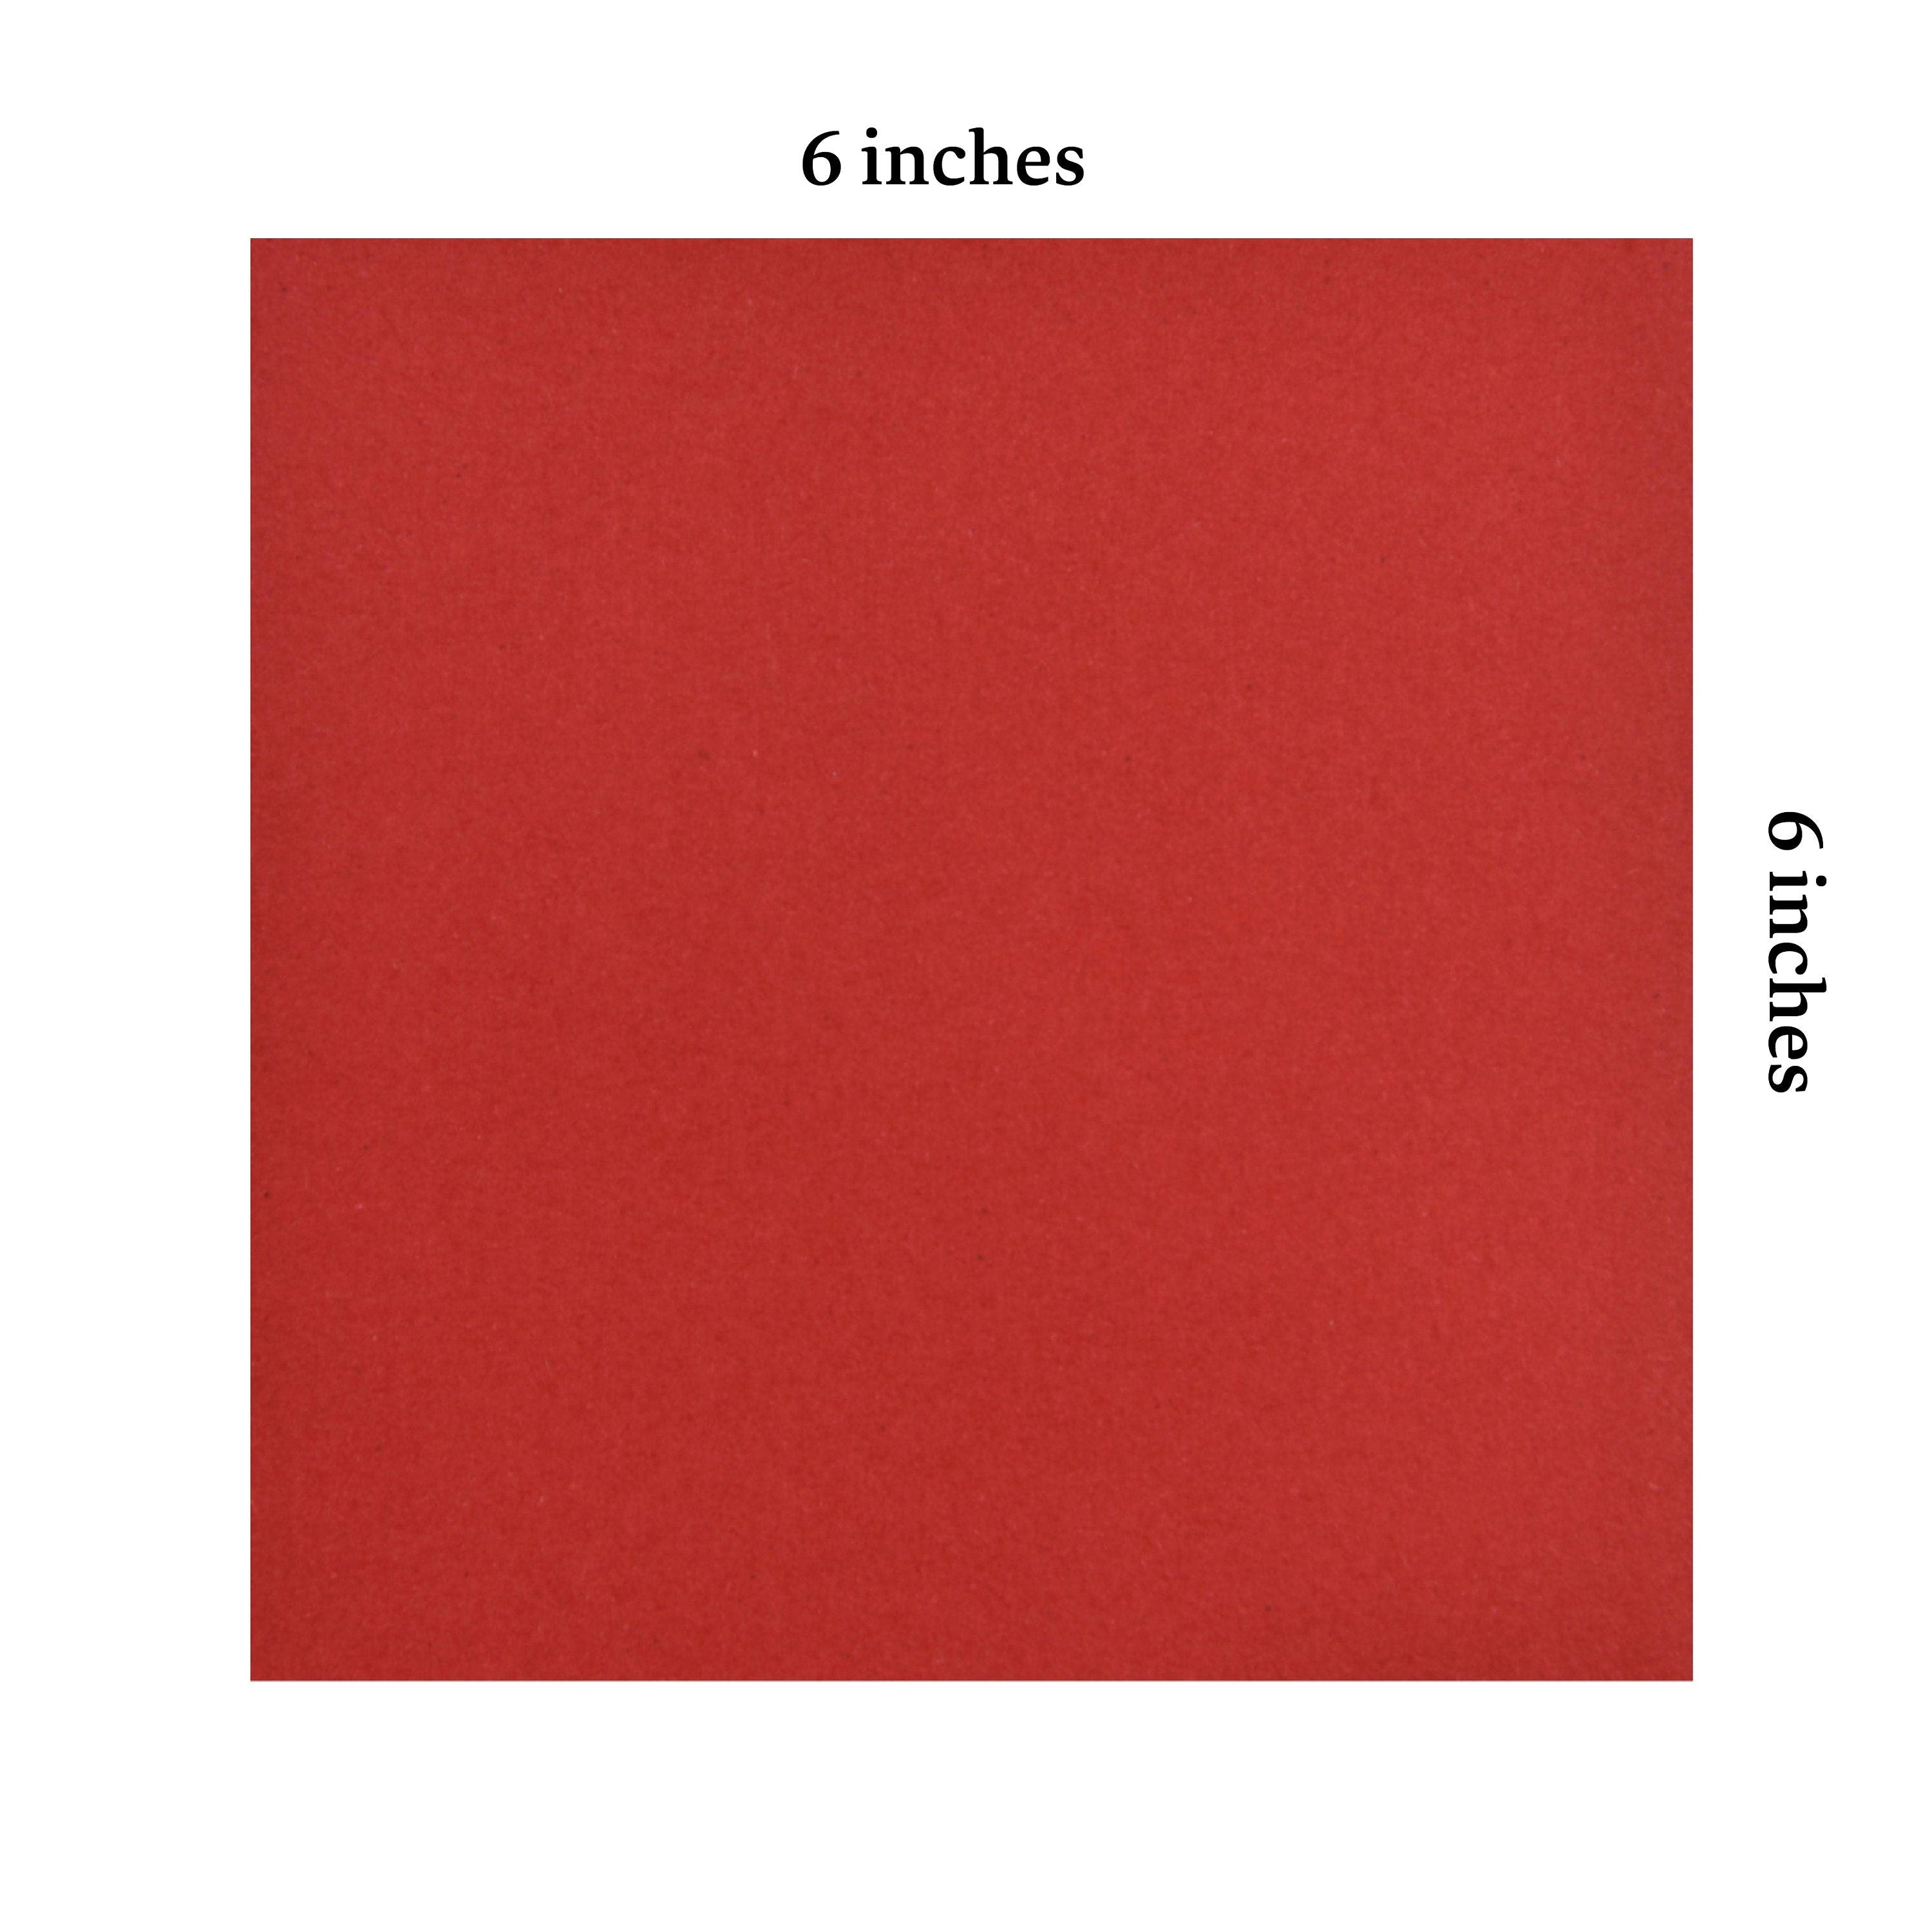 100 Origami Paper Sheets 6x6 inches Square Paper Pack for Folding, Origami Cranes, and Decoration - S05